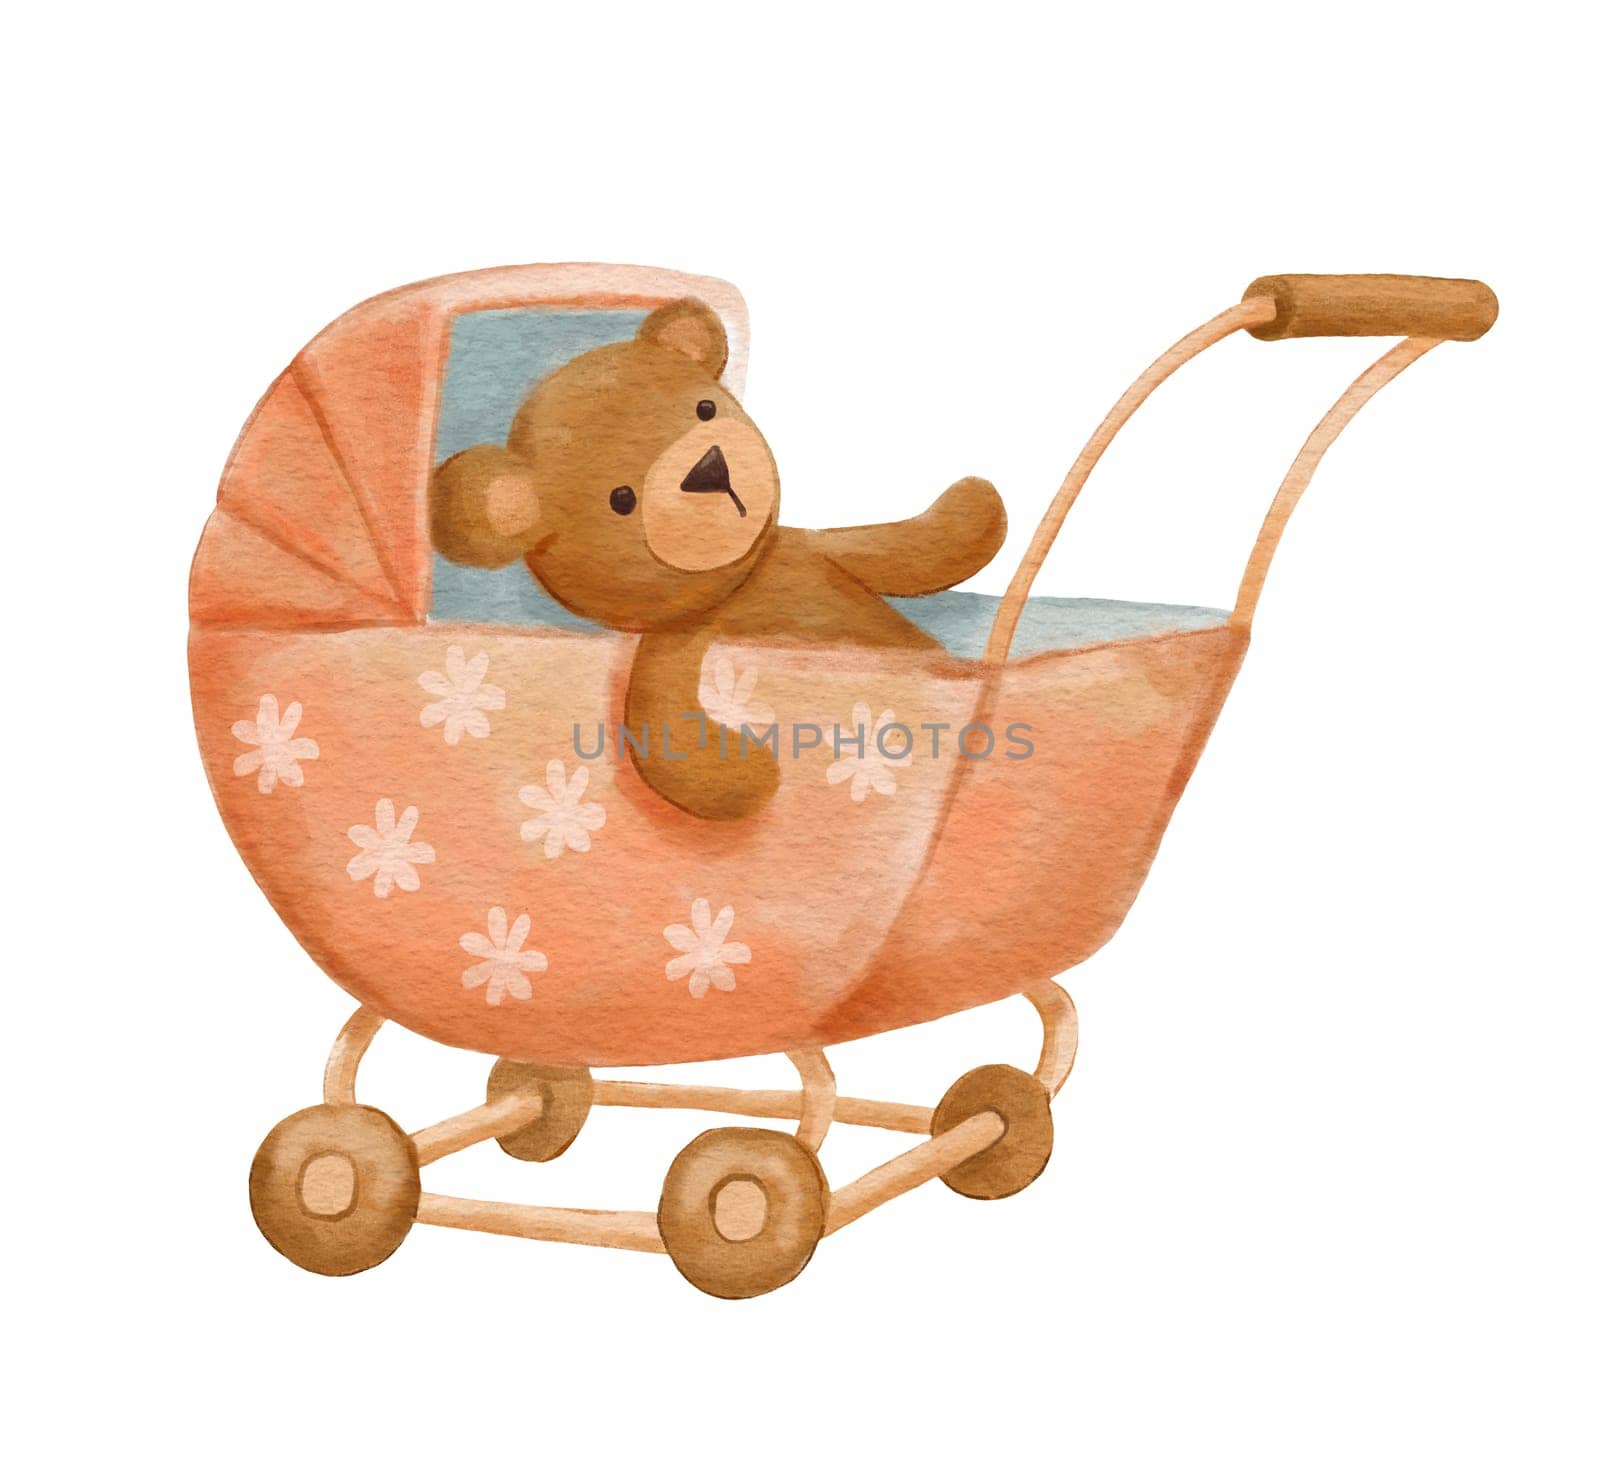 Toy baby stroller and teddy bear isolated on white. Watercolor hand drawn illustration